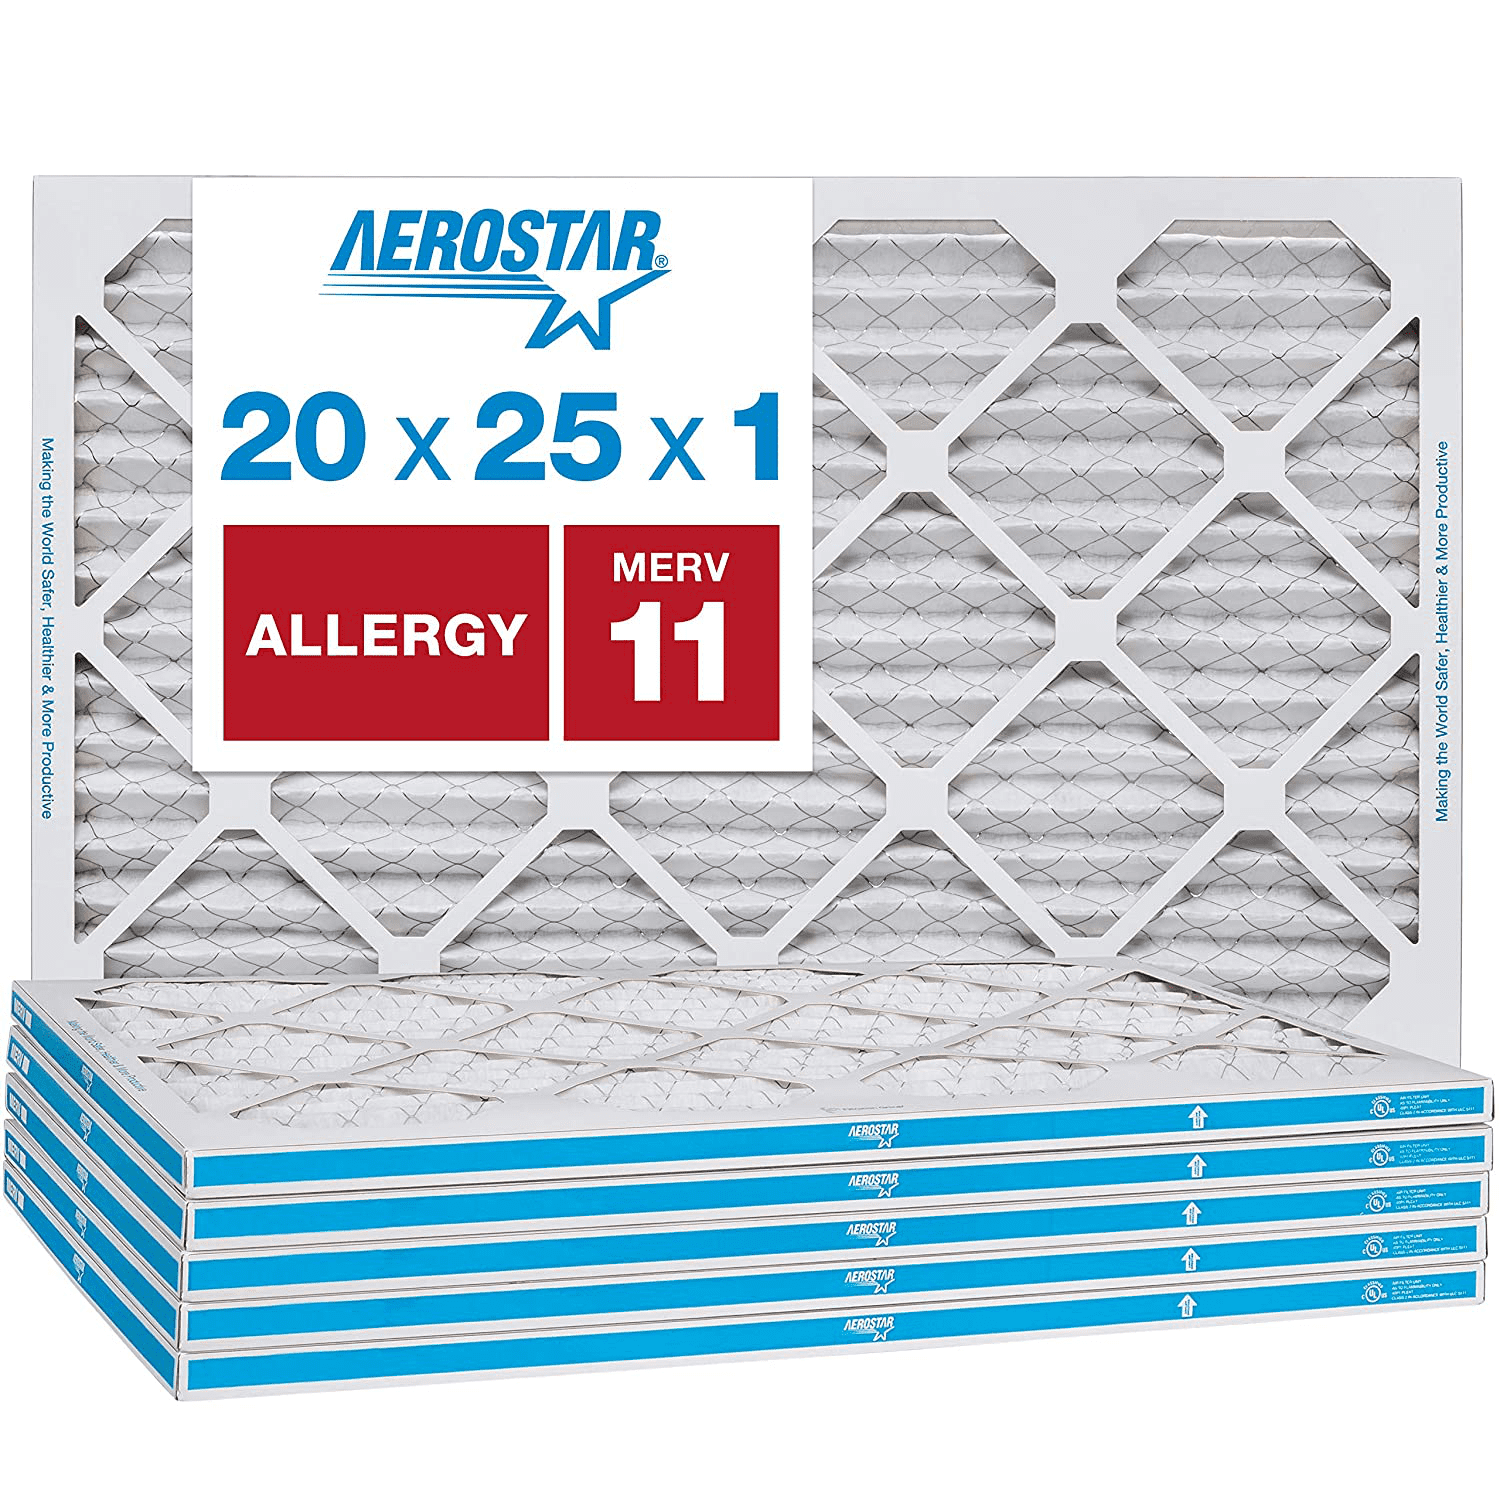 Aerostar Allergen and Pet Dander 12x12x1 MERV 11 Pleated Air Filter Made in the USA Actual Size 11 3/4x11 3/4x3/4 4 Pack 